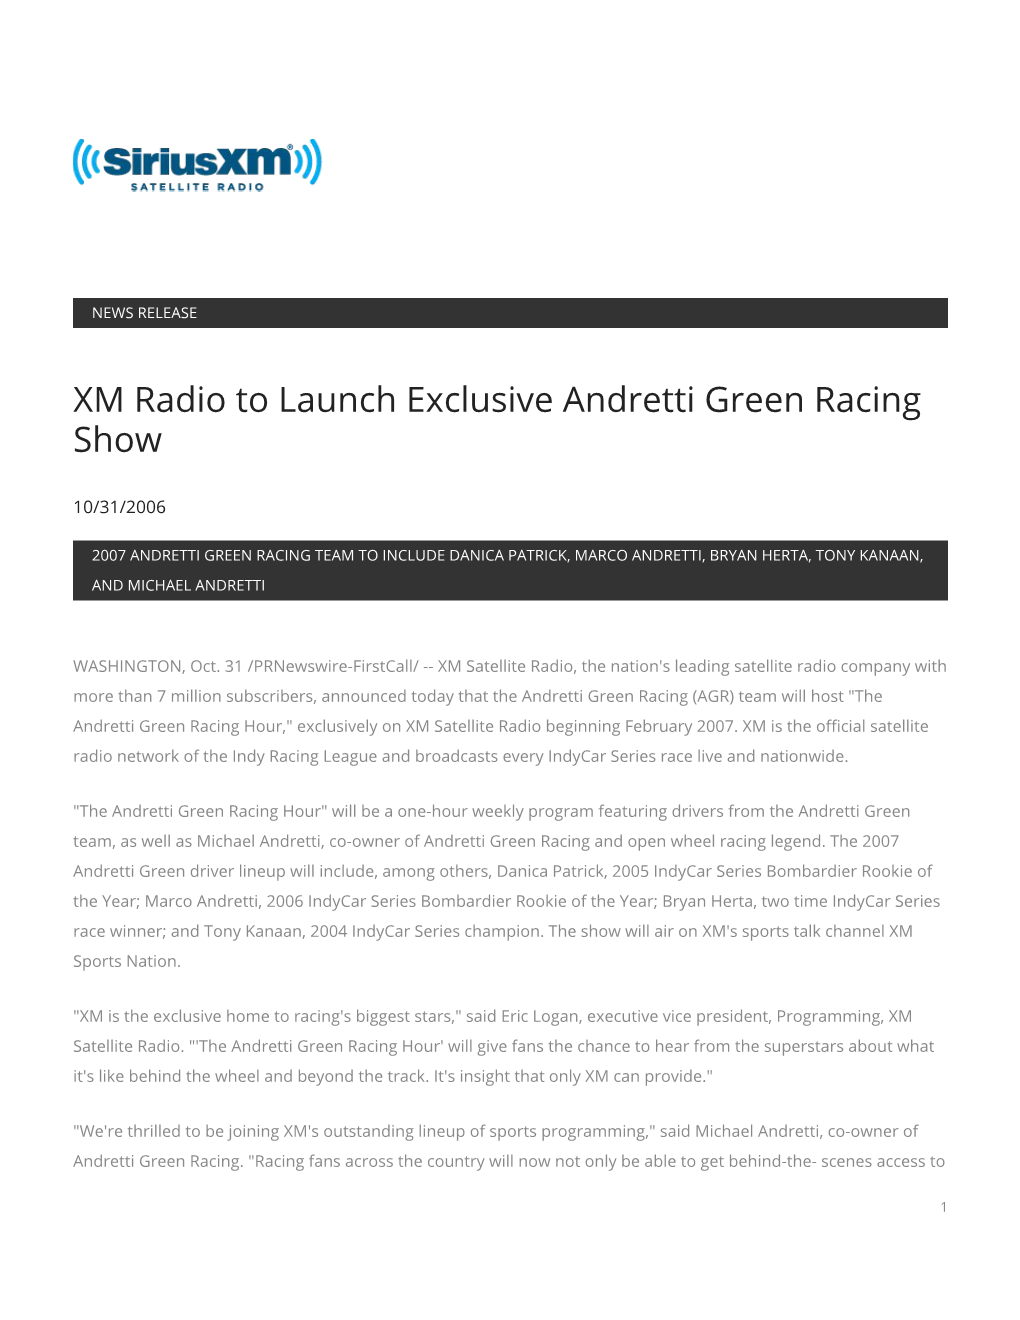 XM Radio to Launch Exclusive Andretti Green Racing Show